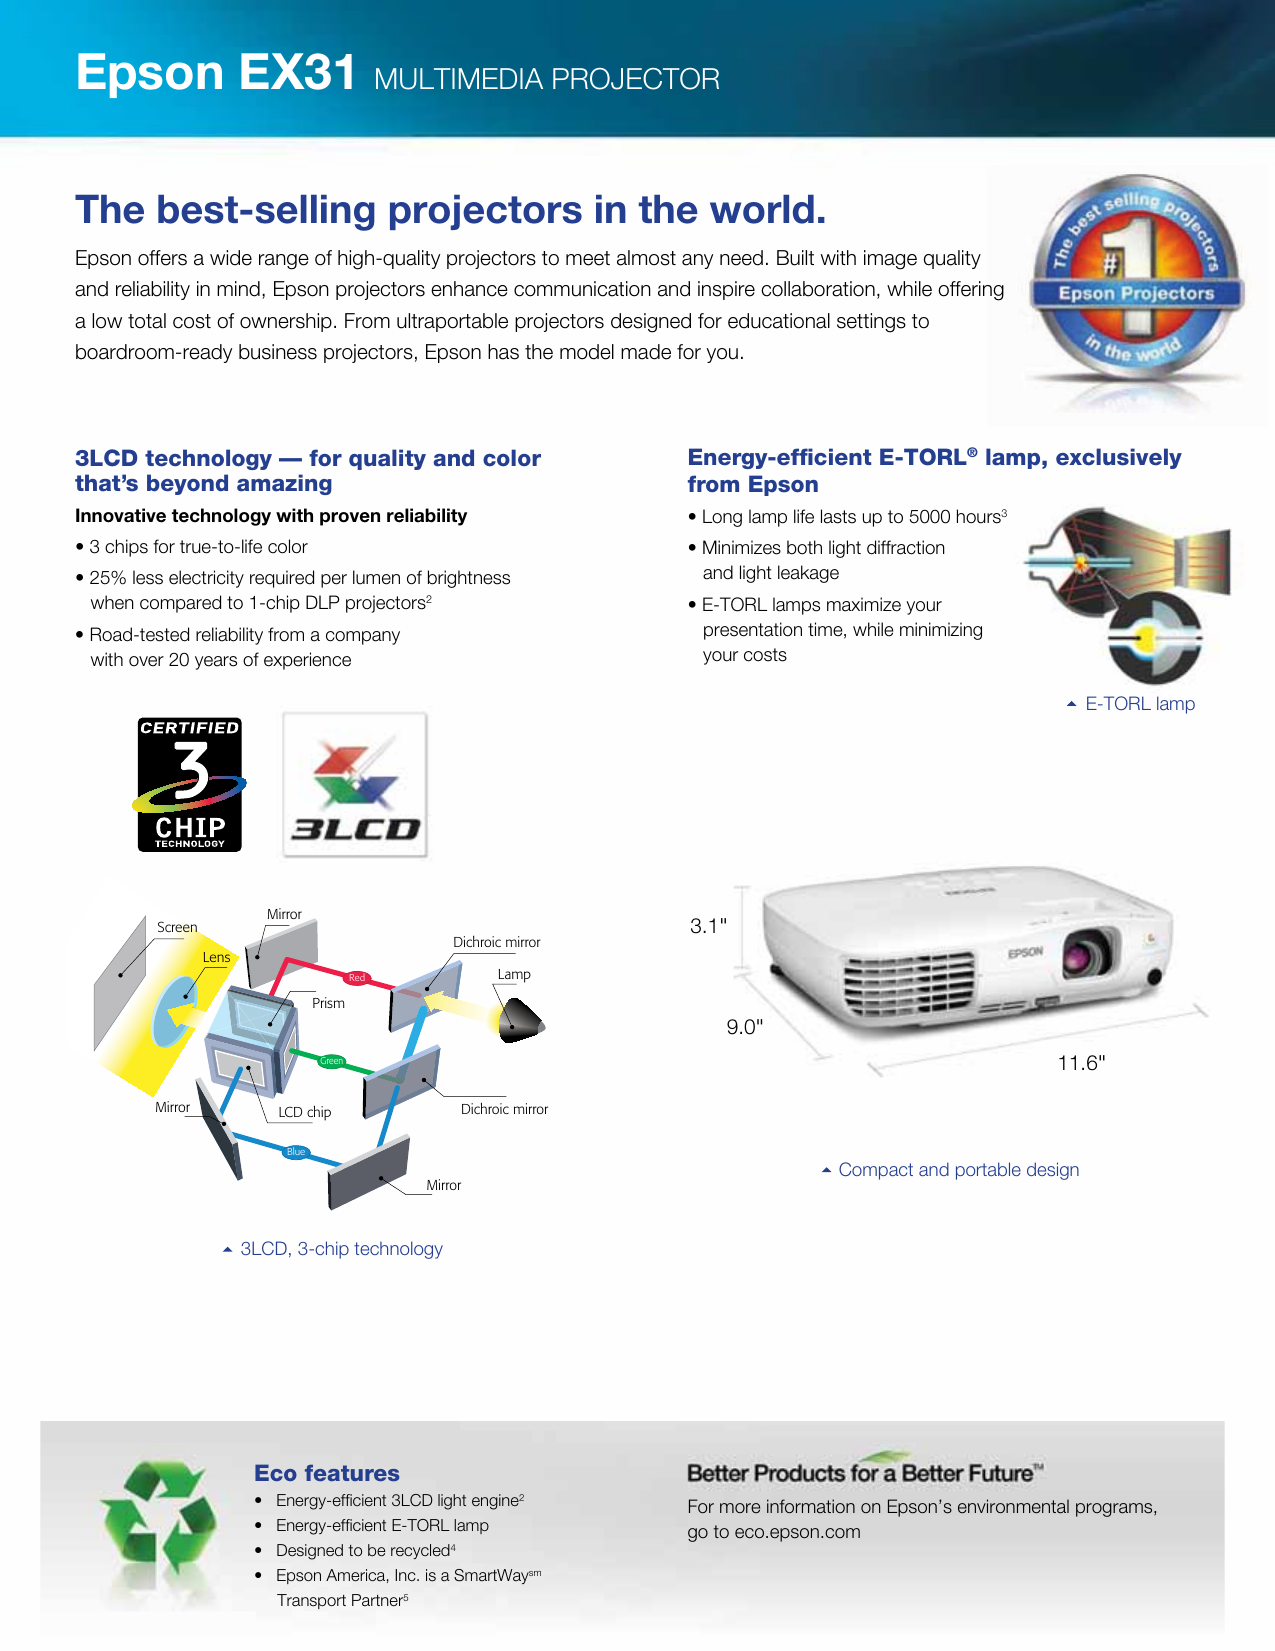 Page 2 of 4 - Epson Epson-Ex31-Multimedia-Projector-Product-Brochure- EX31 - Product Brochure  Epson-ex31-multimedia-projector-product-brochure